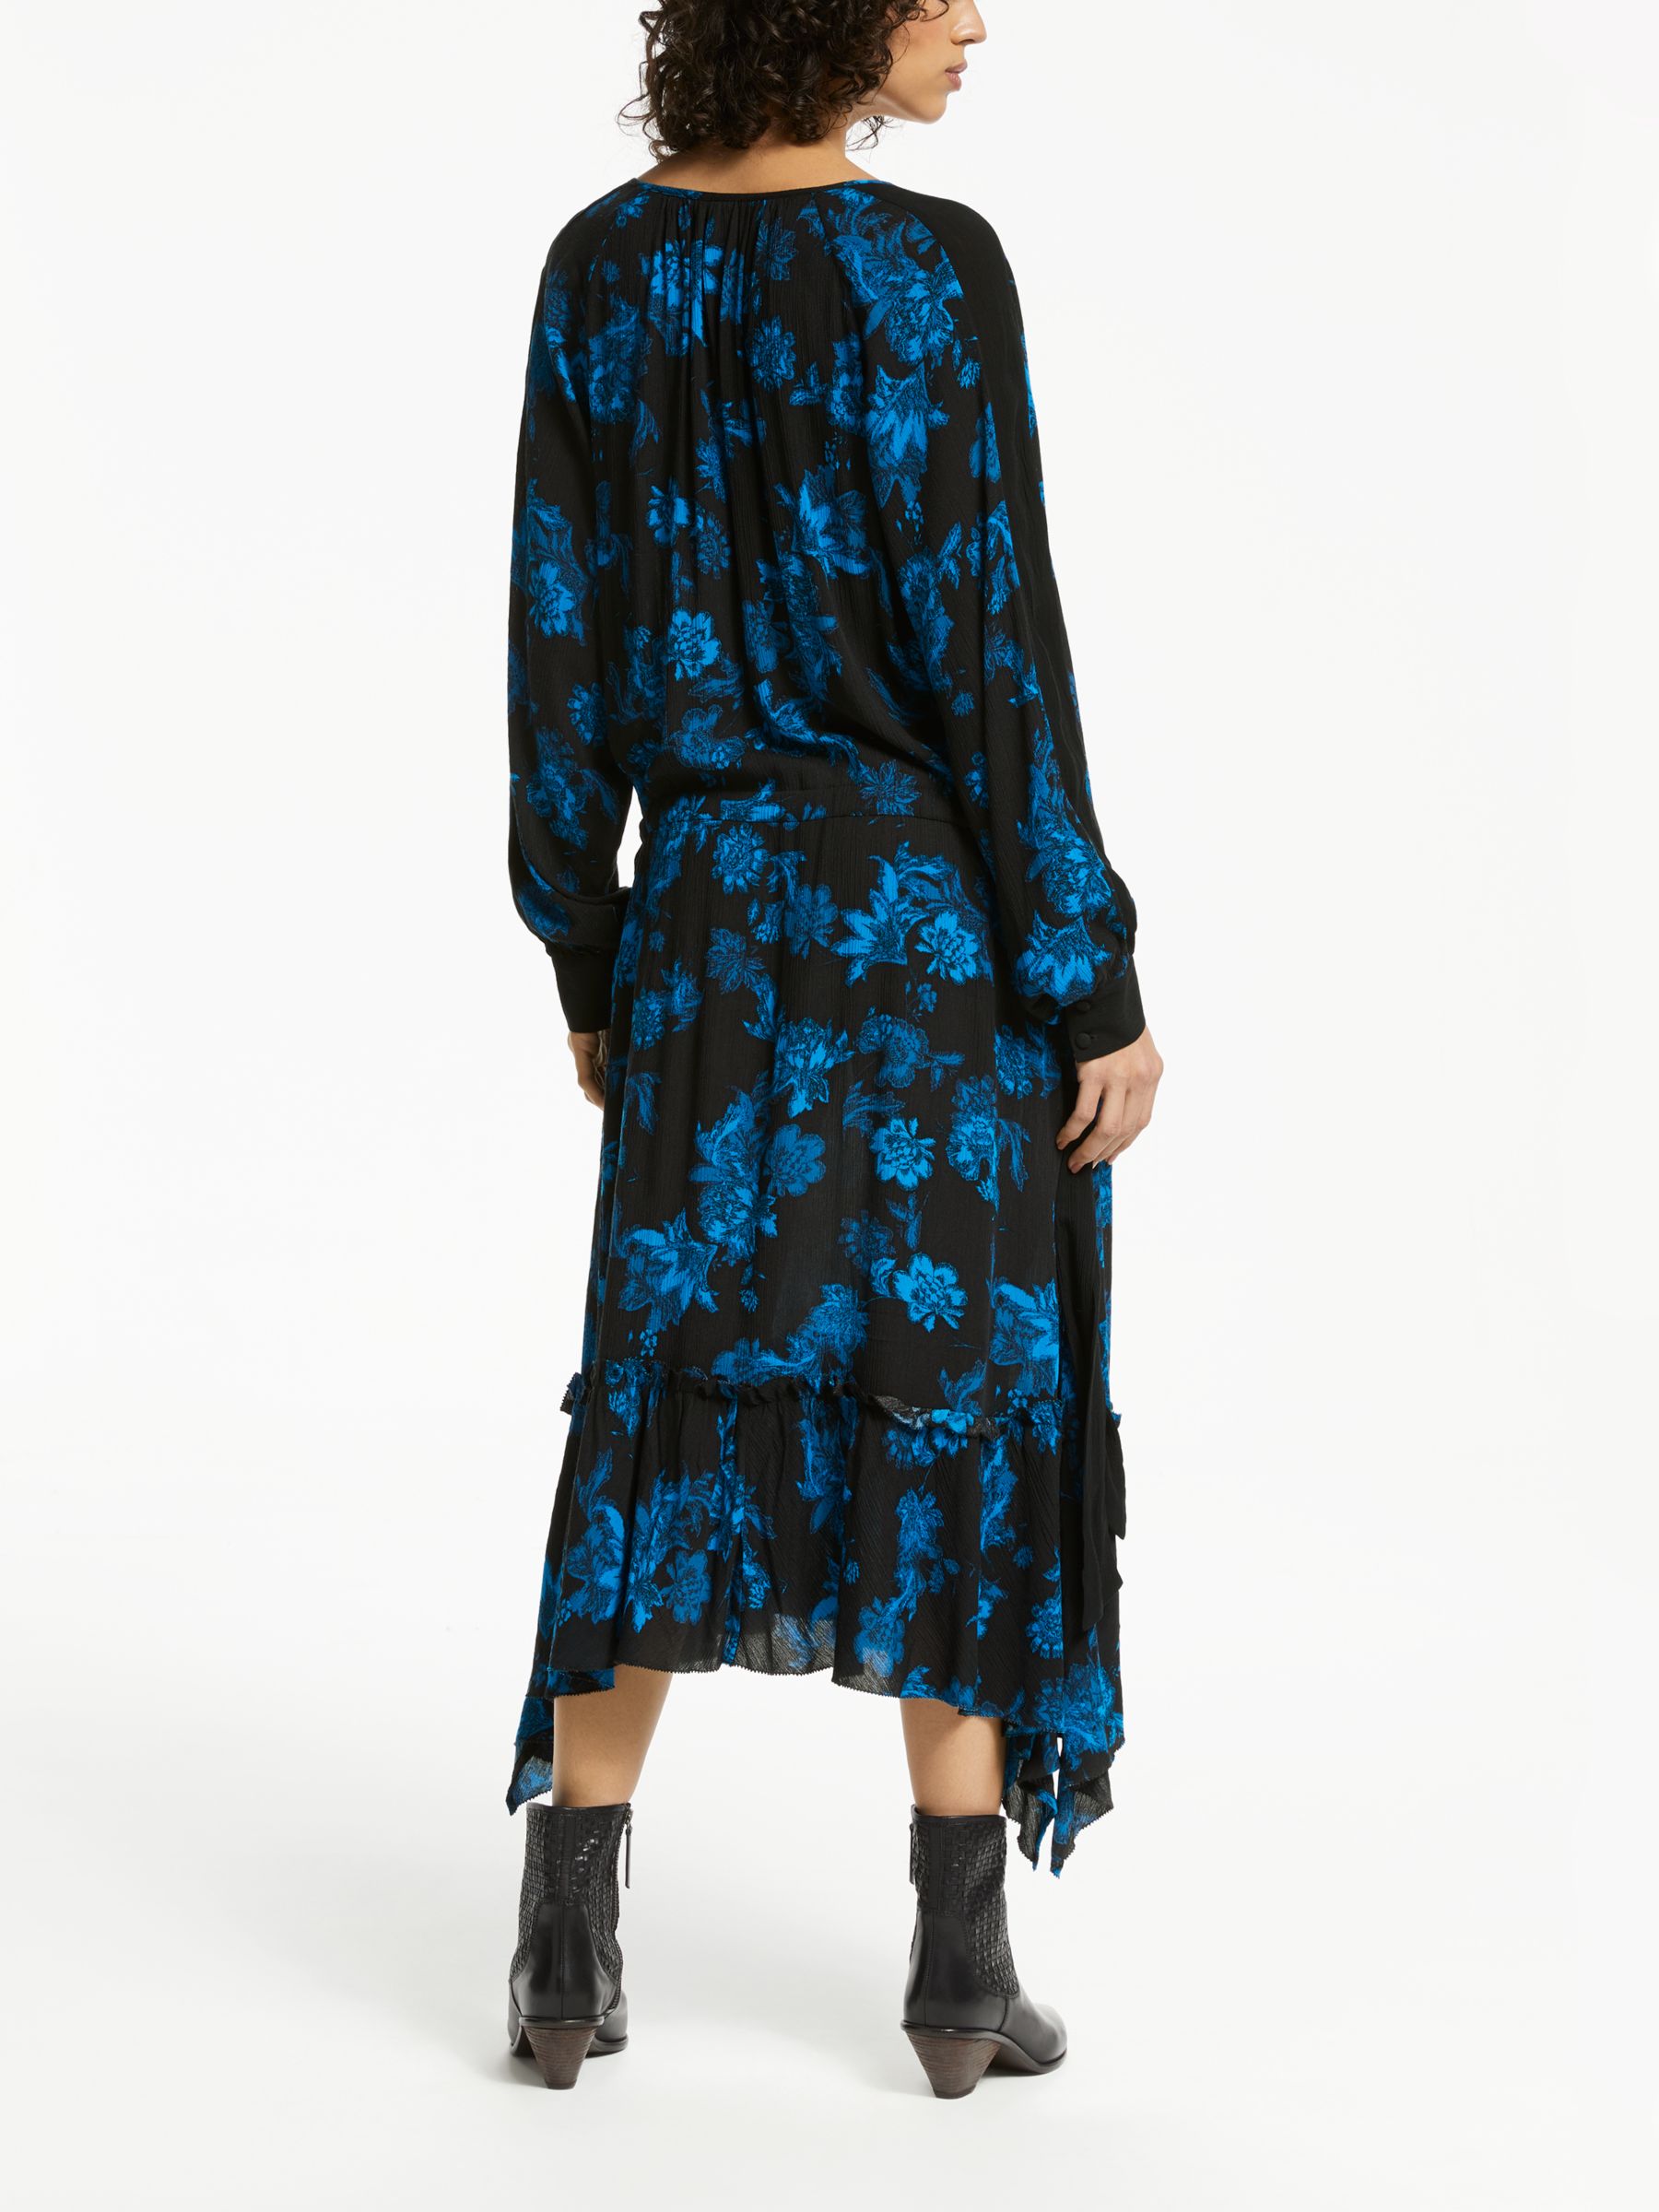 AND/OR Lebon Floral Dress, Navy/Blue